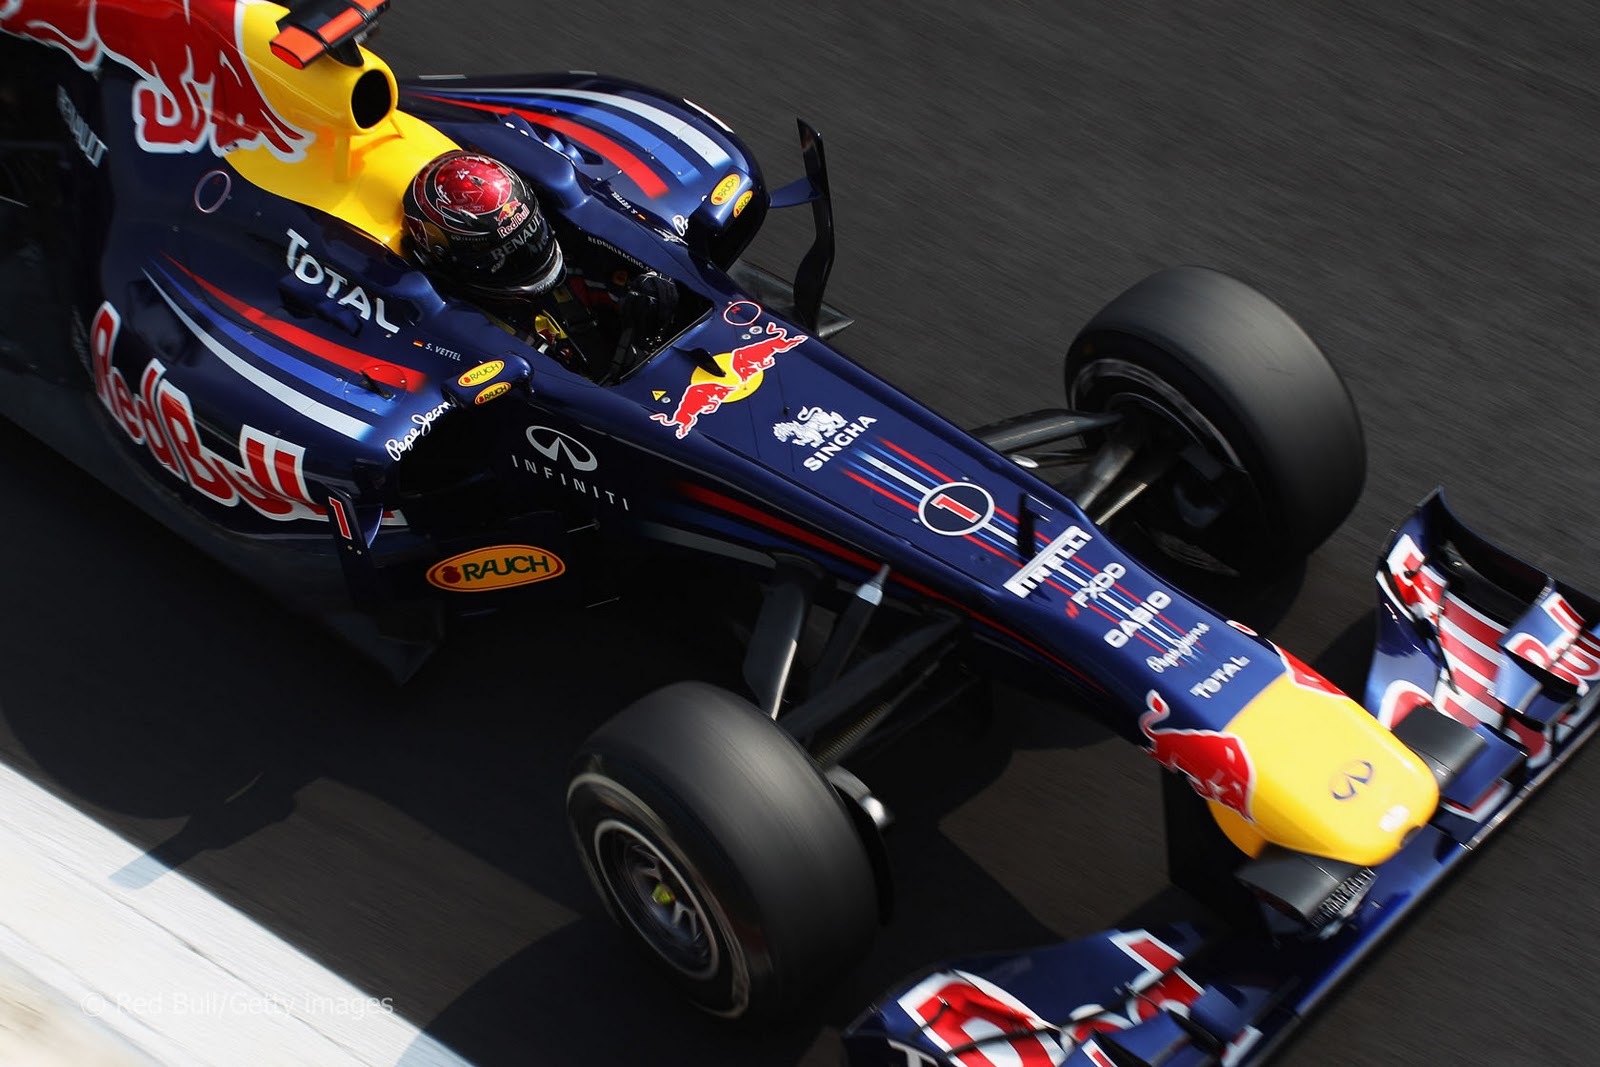 hd wallpapers : Red Bull Rb7 Wallpaper